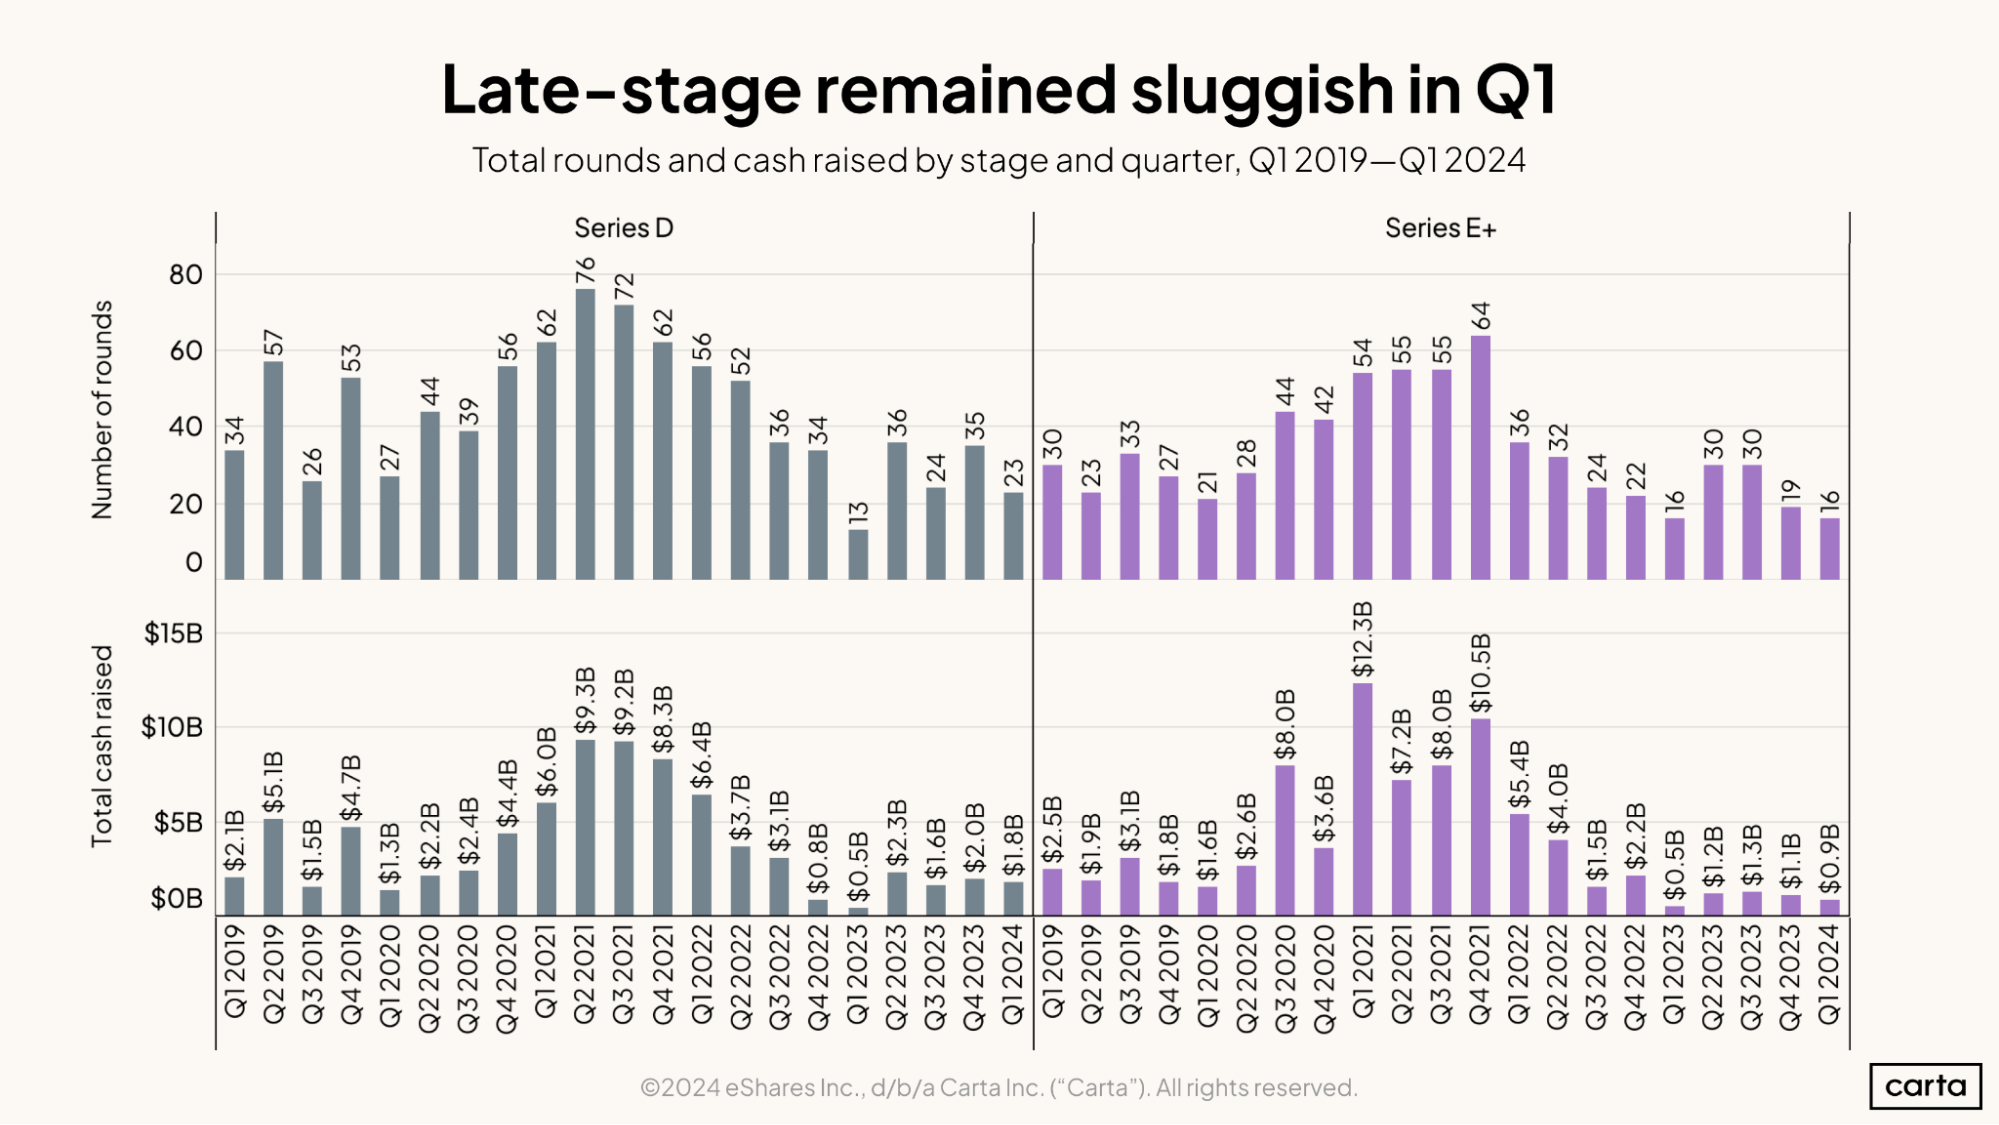 Late-stage remained sluggish in Q1